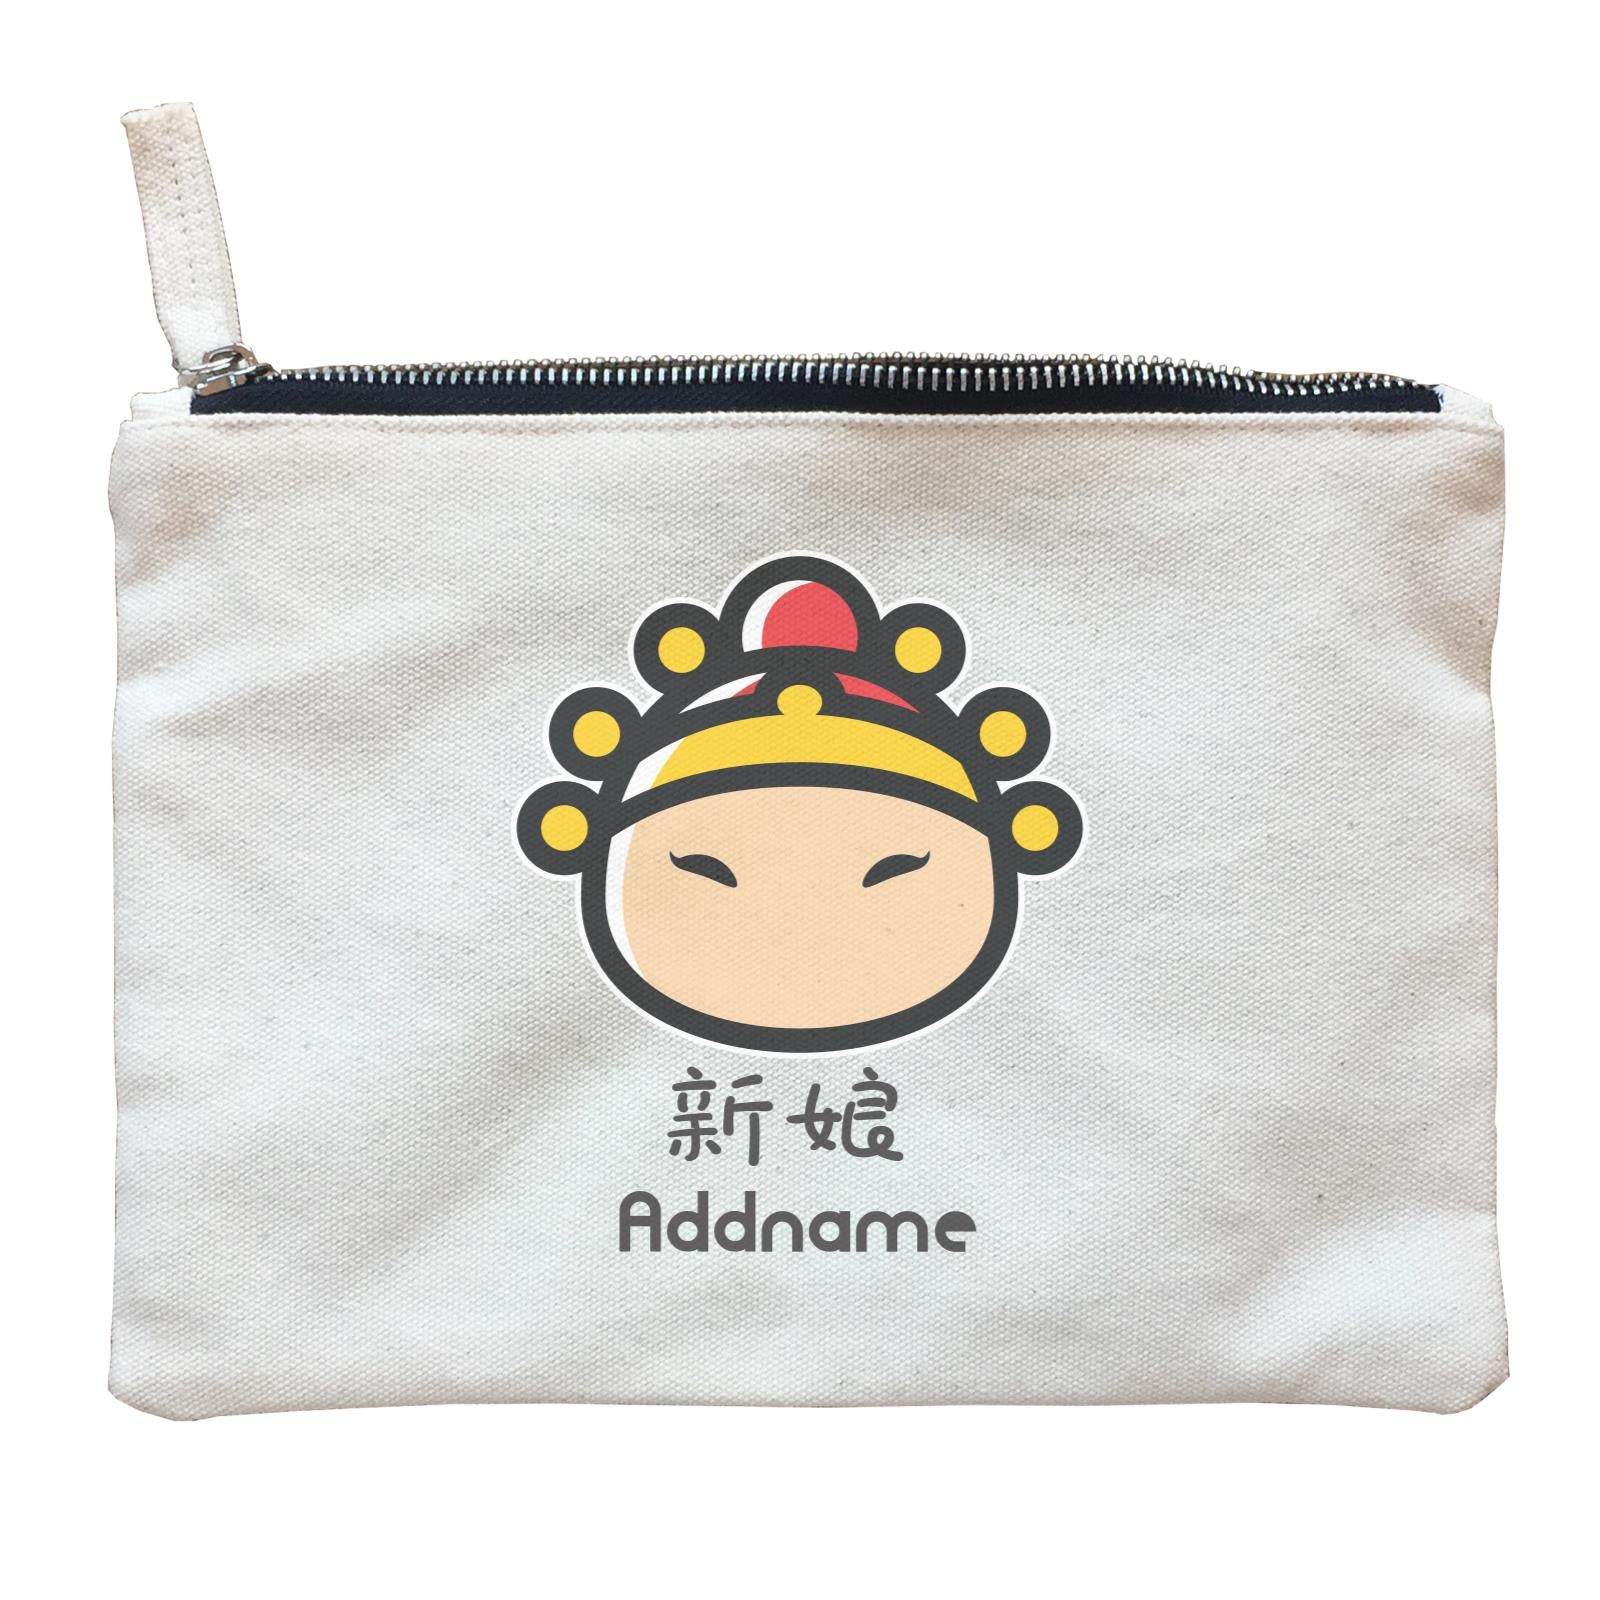 Wedding Couple Eastern Cute Bride Icon Addname Zipper Pouch